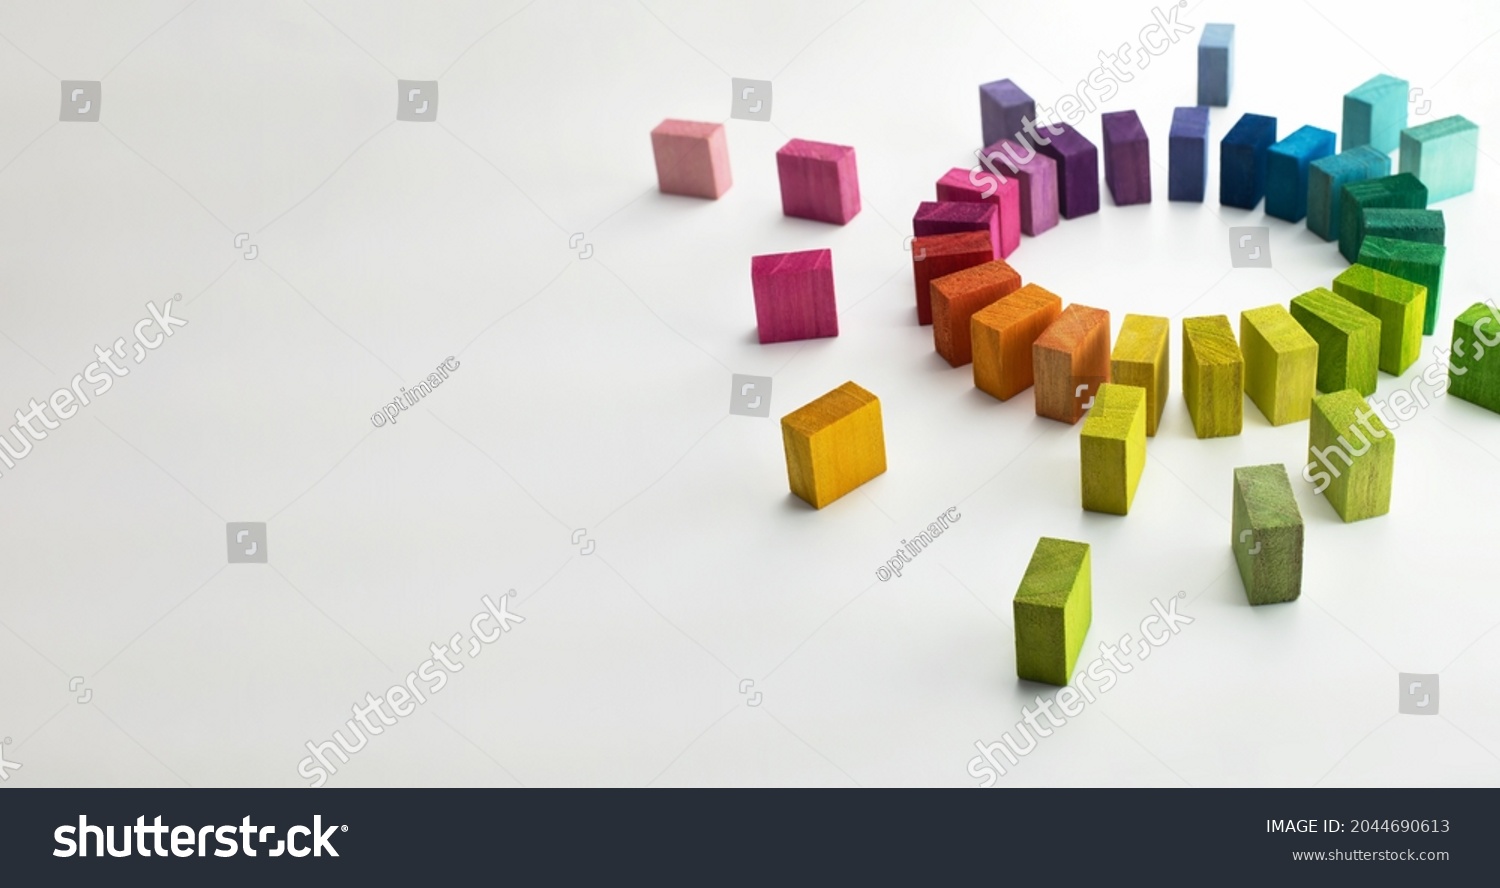 Gathering, centralization, of data and people, concept image.
Circle of colorful wooden blocks representing unity of diverse elements. Isolated on neutral white. #2044690613